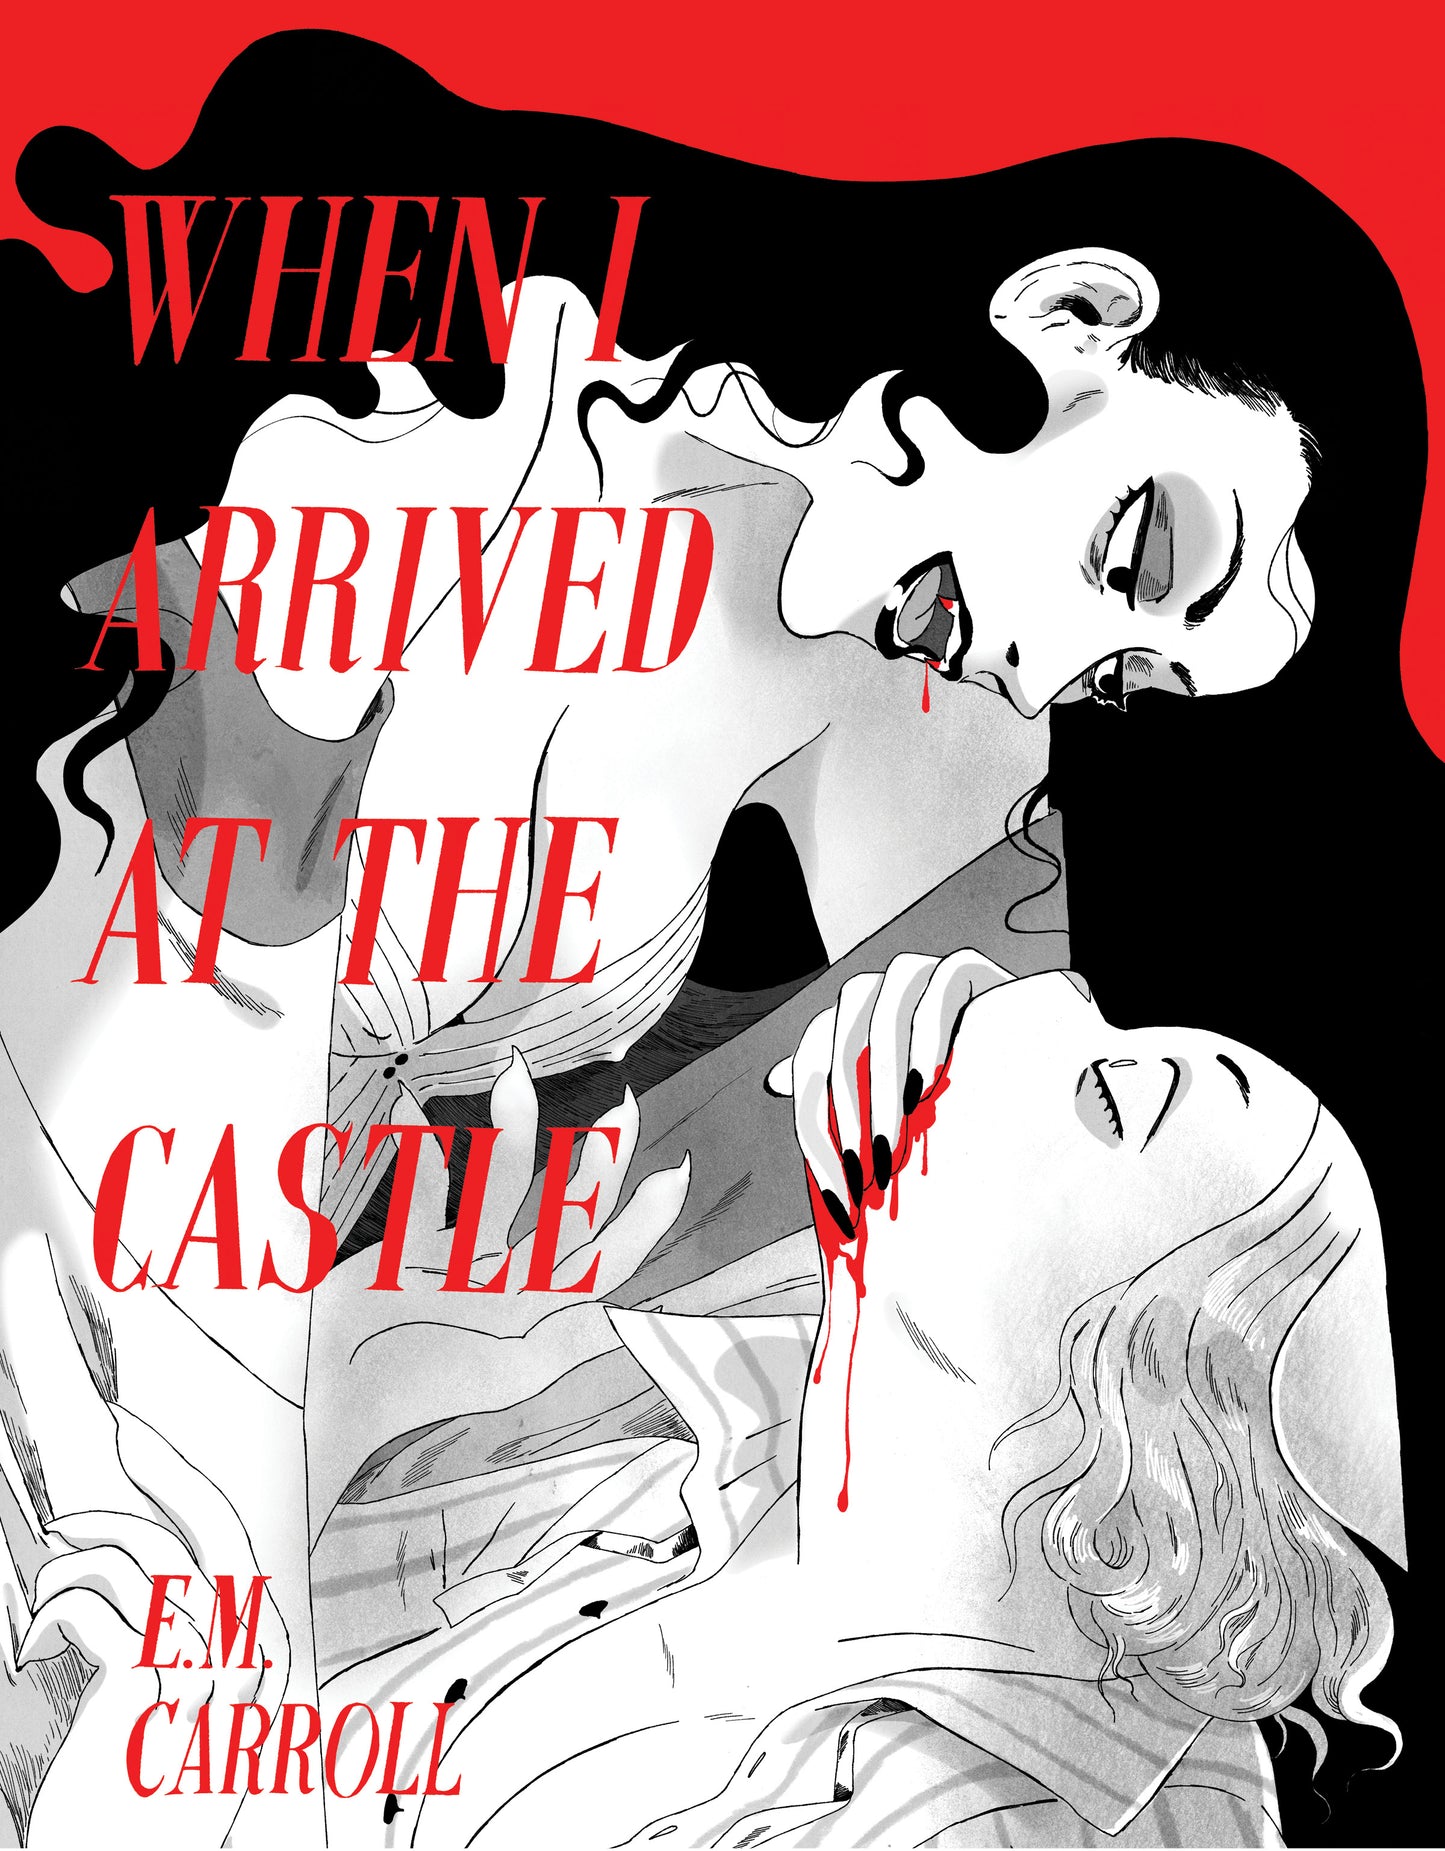 PDF Download: When I Arrived at the Castle by E.M. Carroll